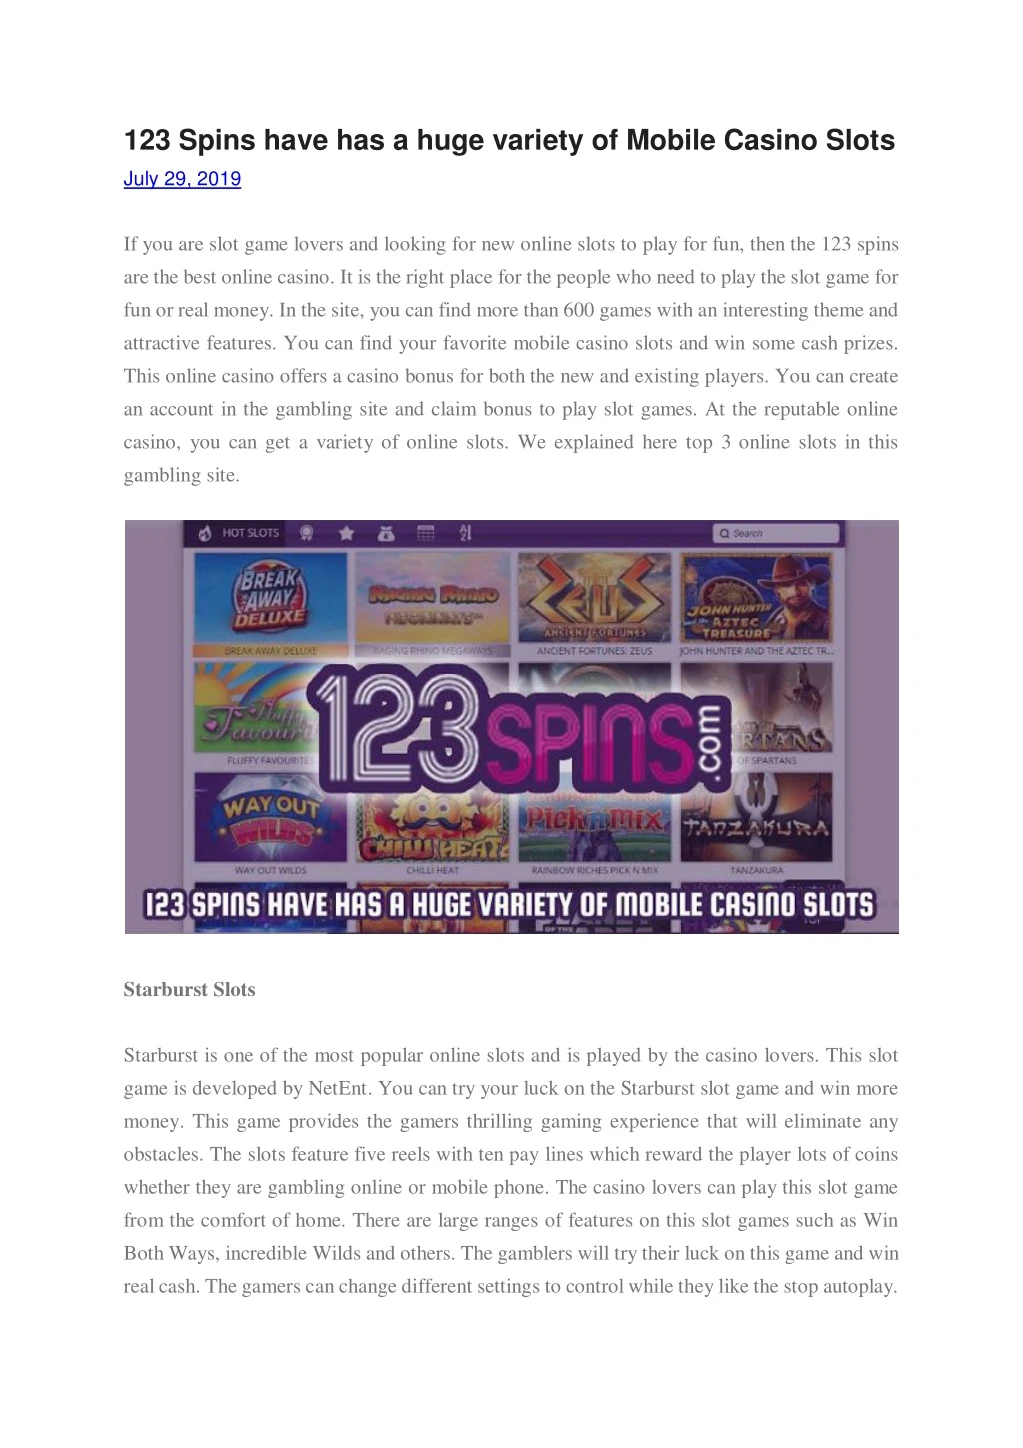 123 spins have has a huge variety of mobile